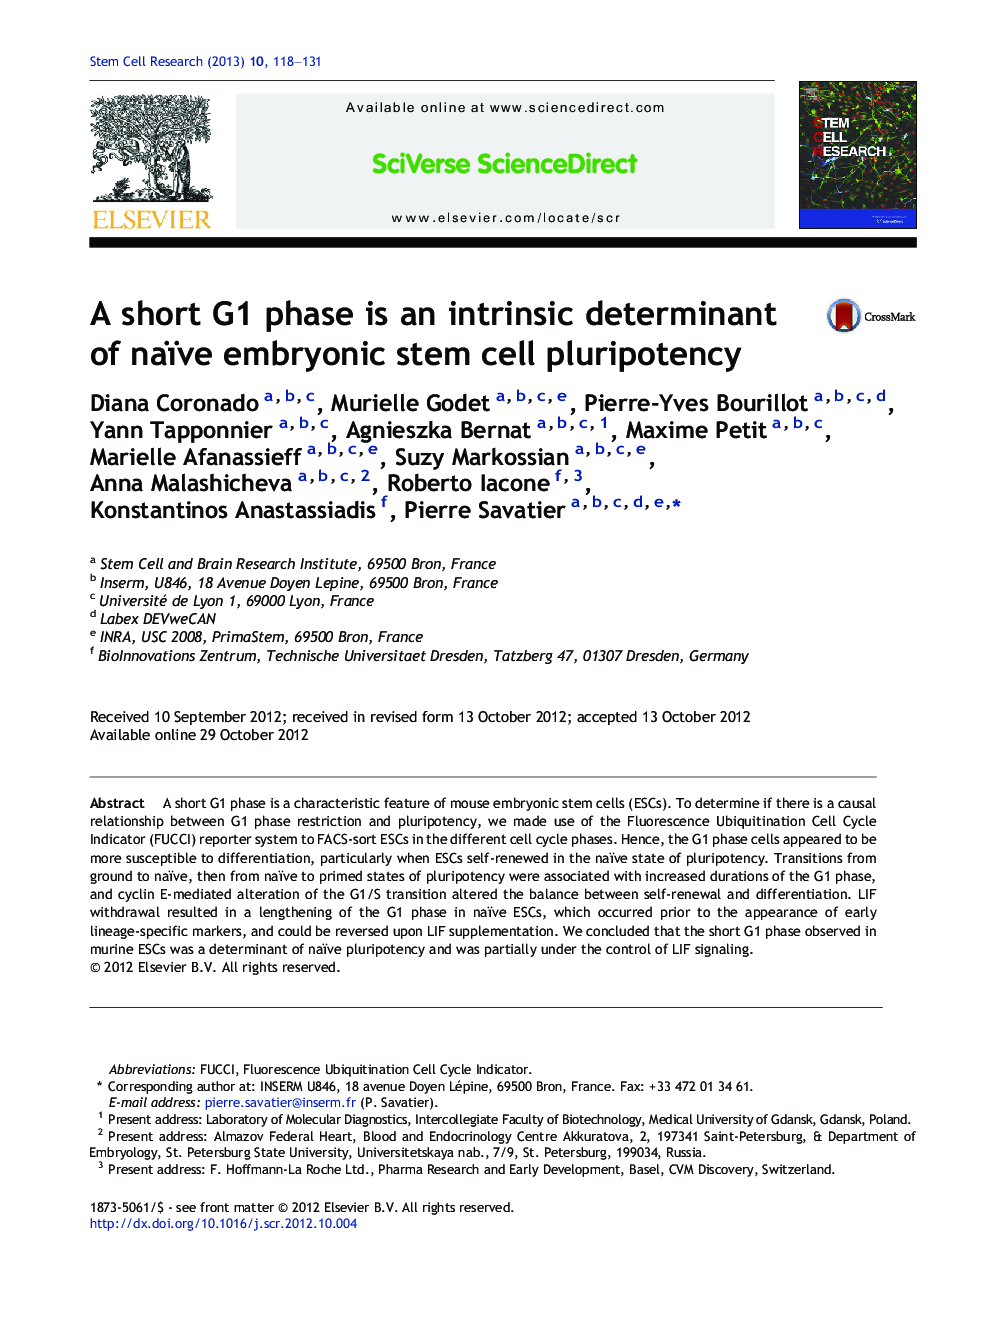 A short G1 phase is an intrinsic determinant of naïve embryonic stem cell pluripotency